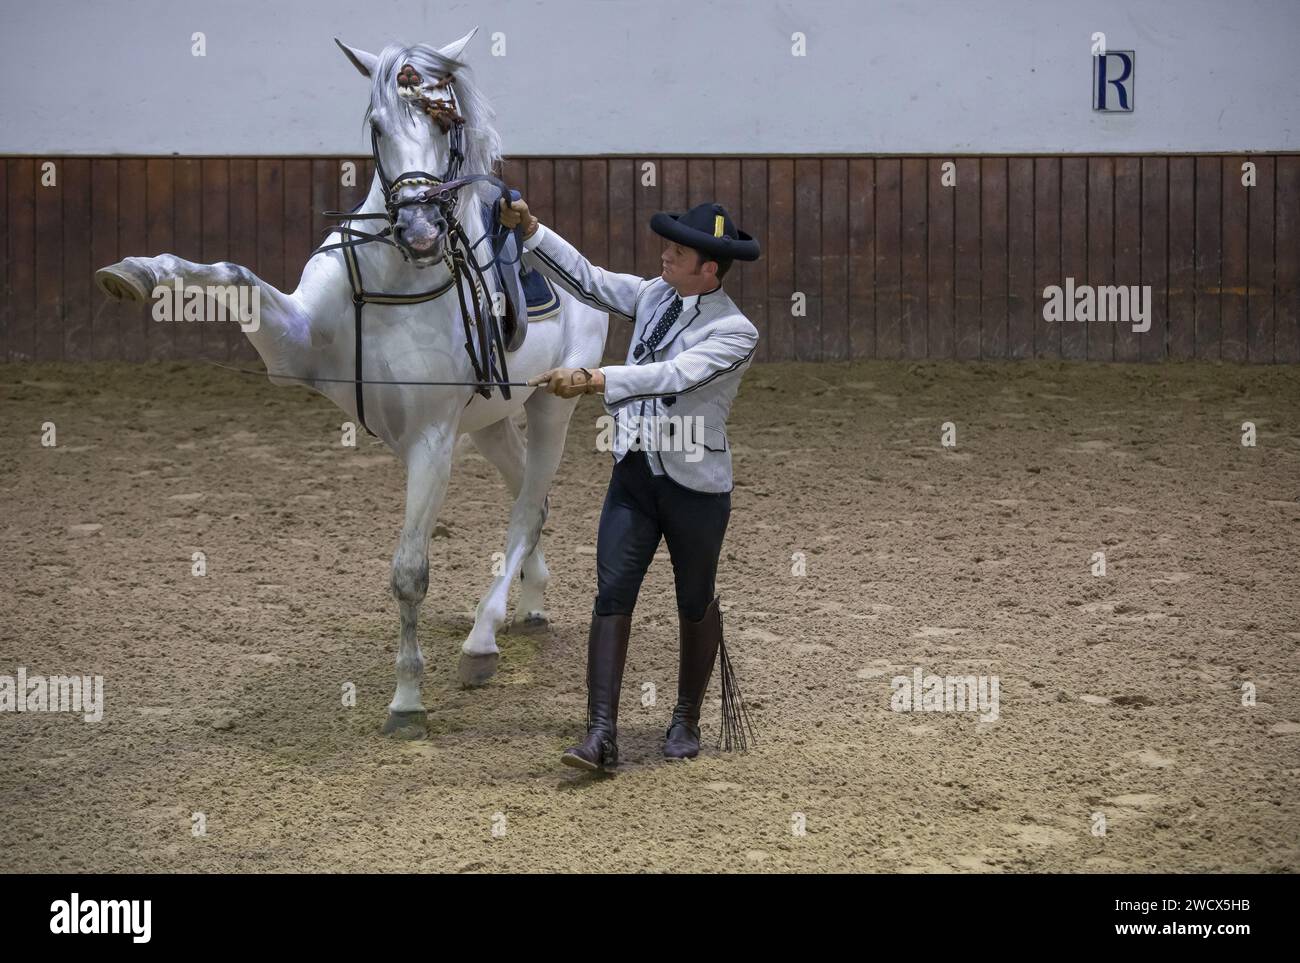 Spain, Andalusia, Jerez de la Frontera, royal Andalusian school of equestrian art, rider in Goyesque costume performing a dressage number with a white horse during an exhibition show of doma vaquera, the art of Andalusian dressage Stock Photo